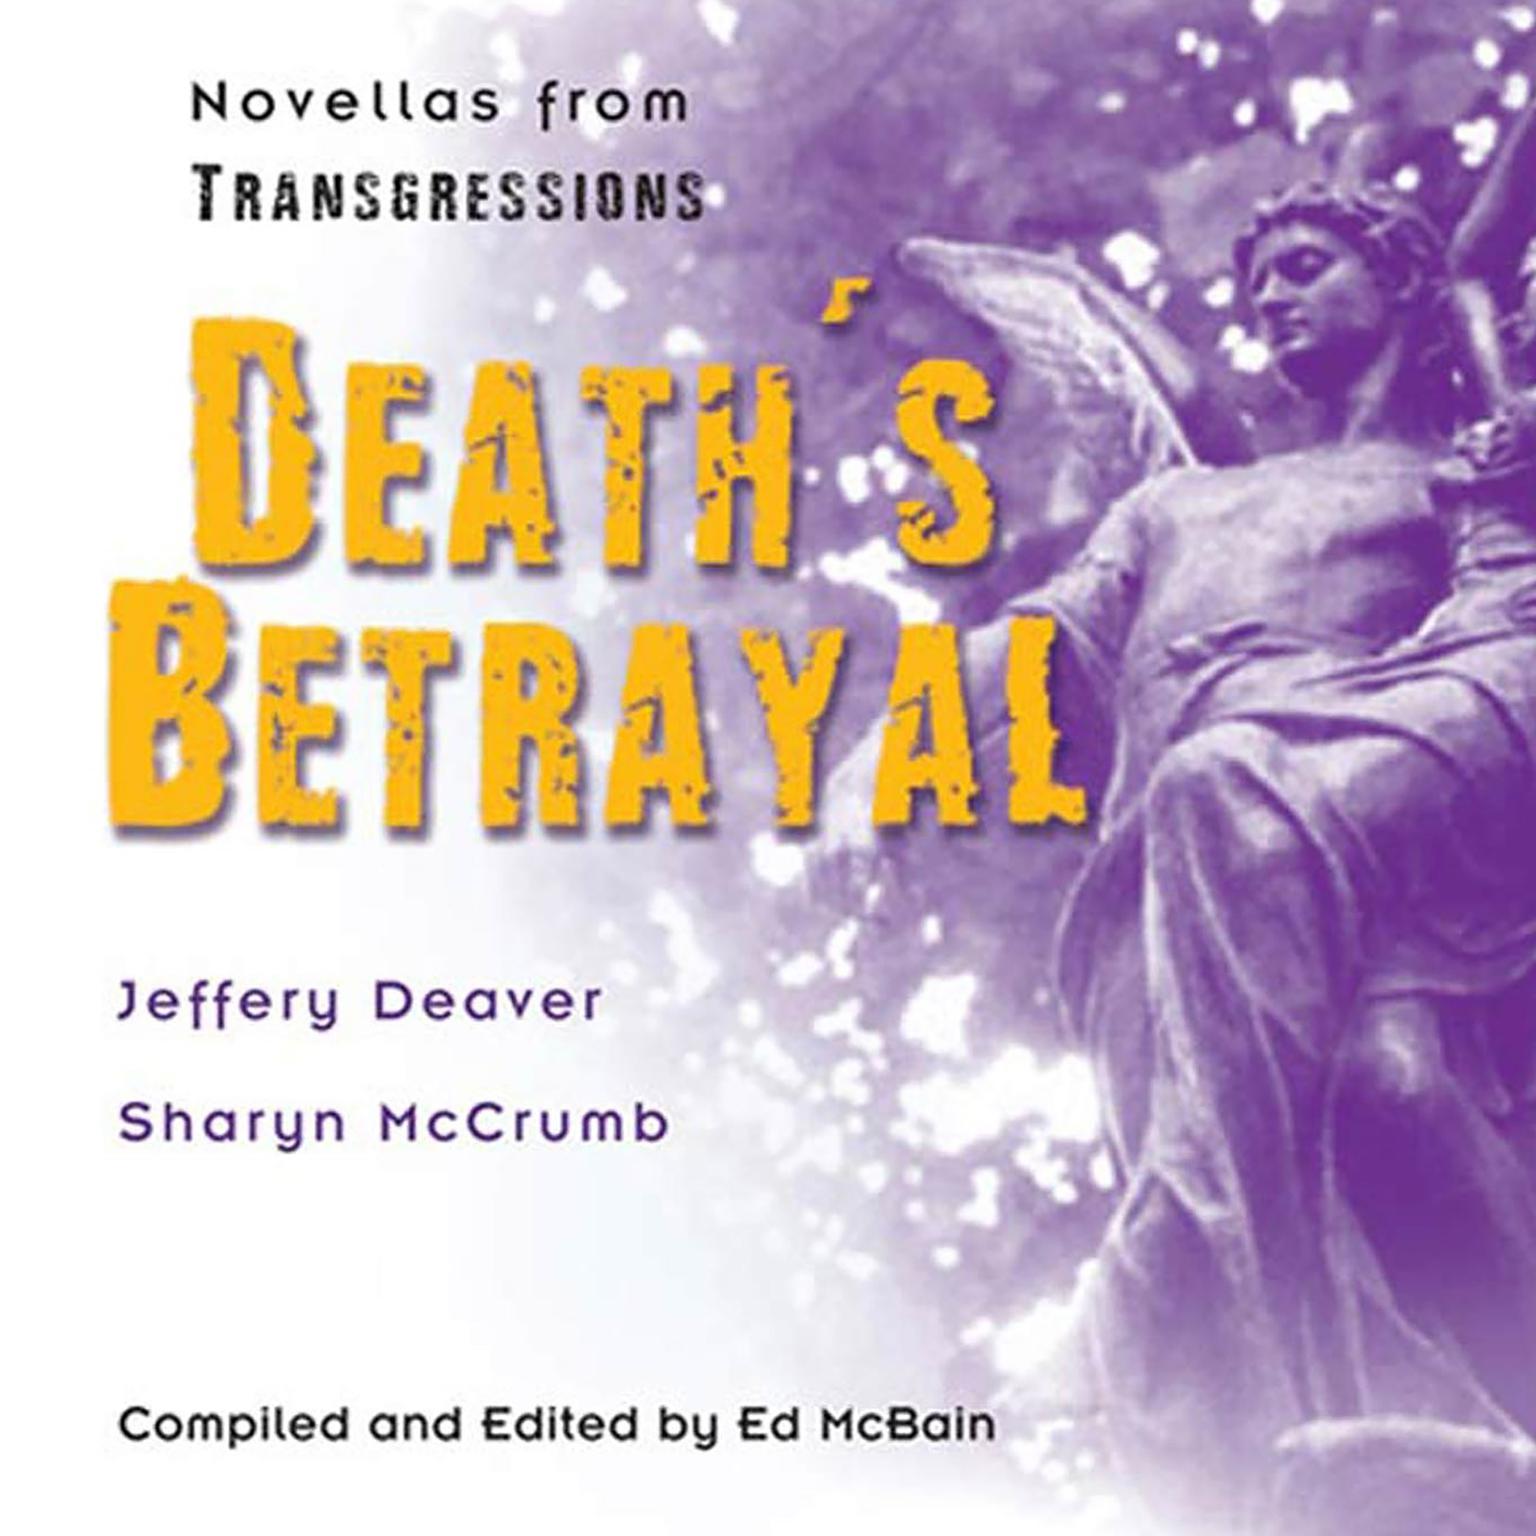 Transgressions: Deaths Betrayal: Two Novellas from Transgressions Audiobook, by Ed McBain